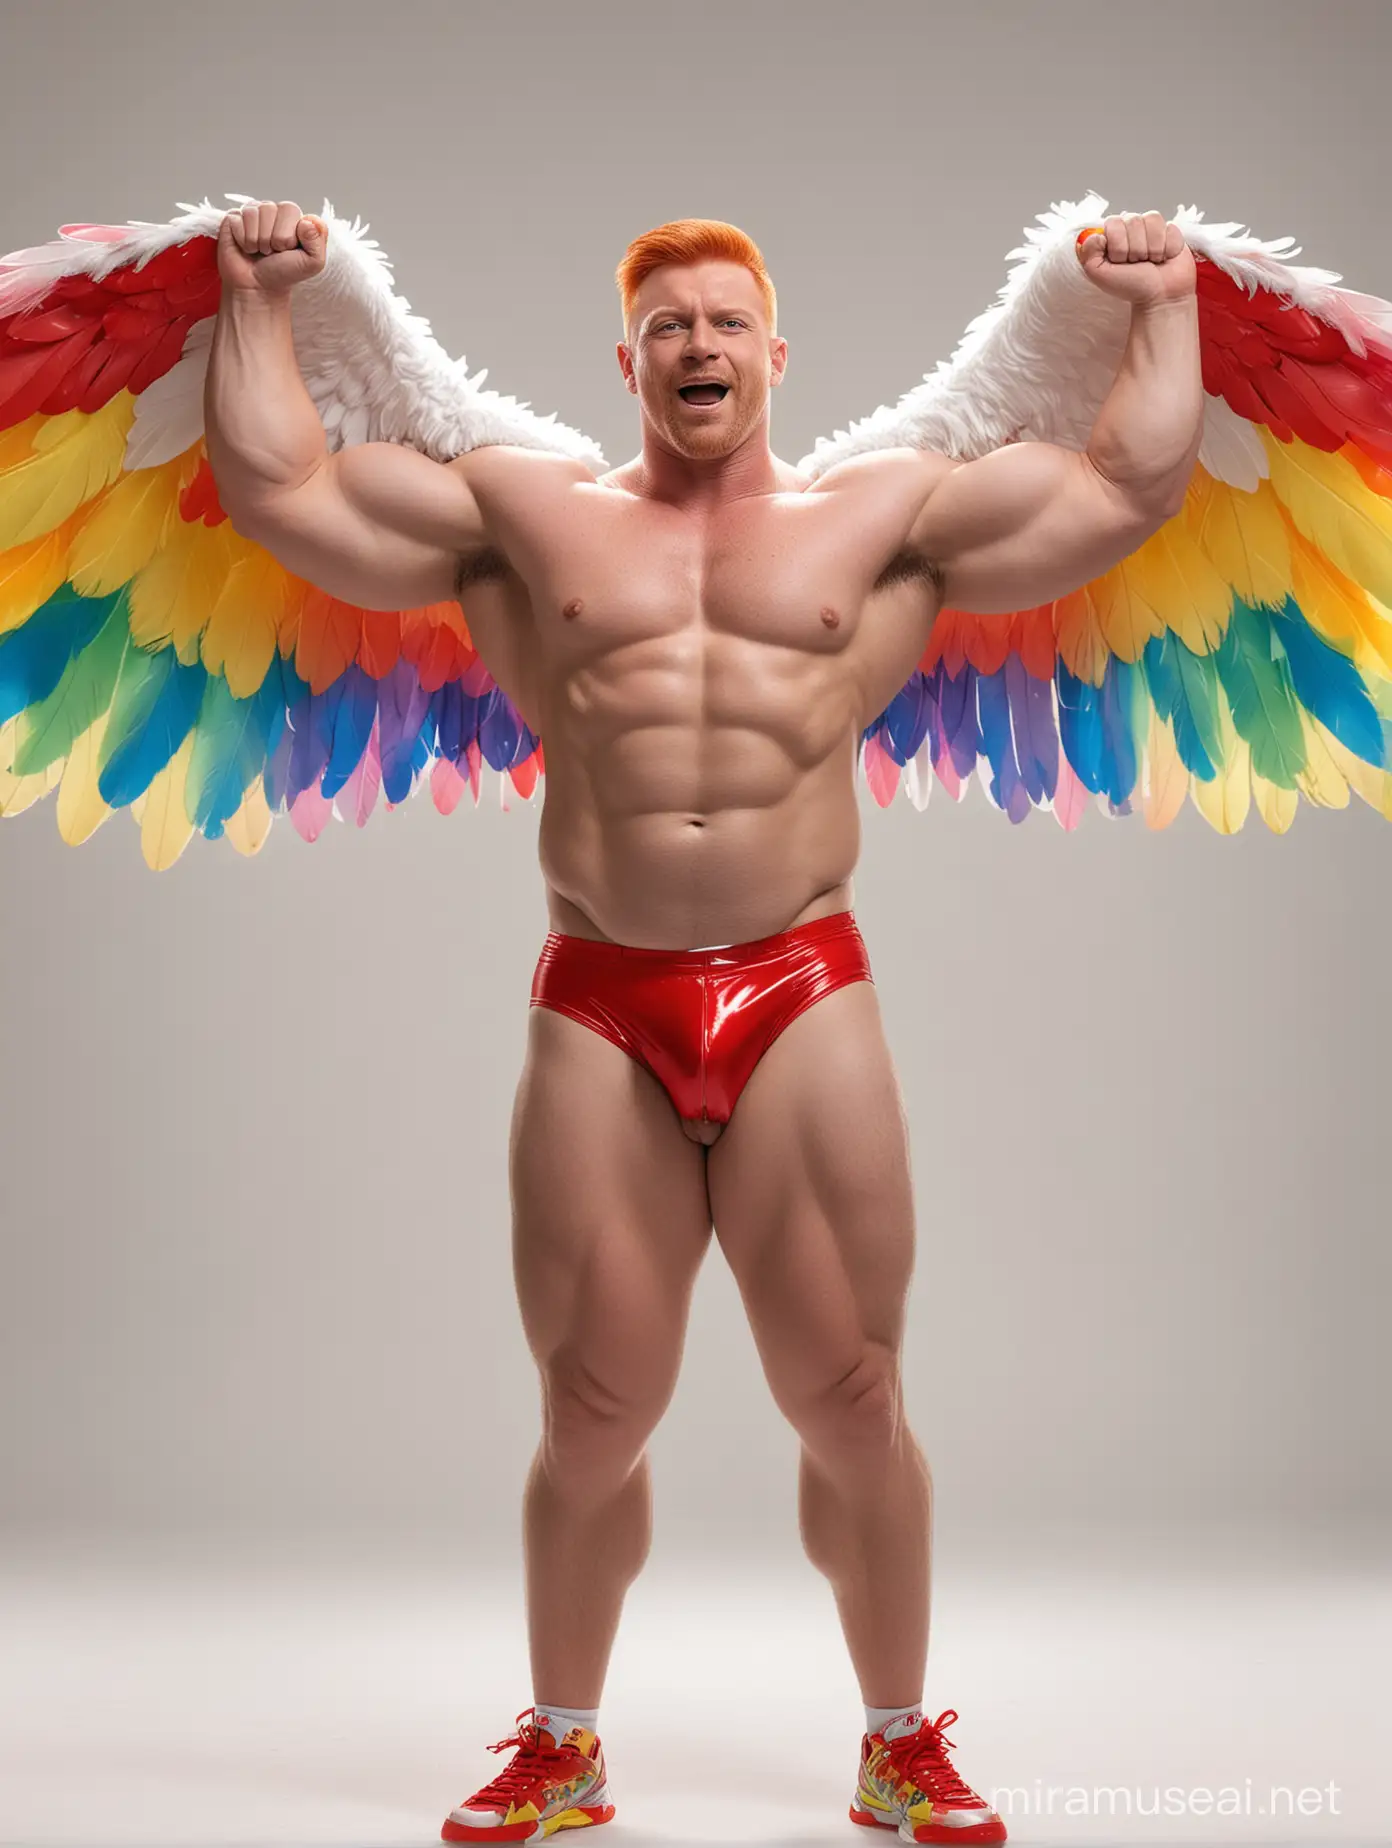 Studio Light Topless 30s Ultra Chunky Red Head Bodybuilder Daddy Wearing Multi-Highlighter Bright Rainbow Colored See Through huge Eagle Wings Shoulder Jacket short shorts and Flexing his Big Strong Arm Up with Doraemon